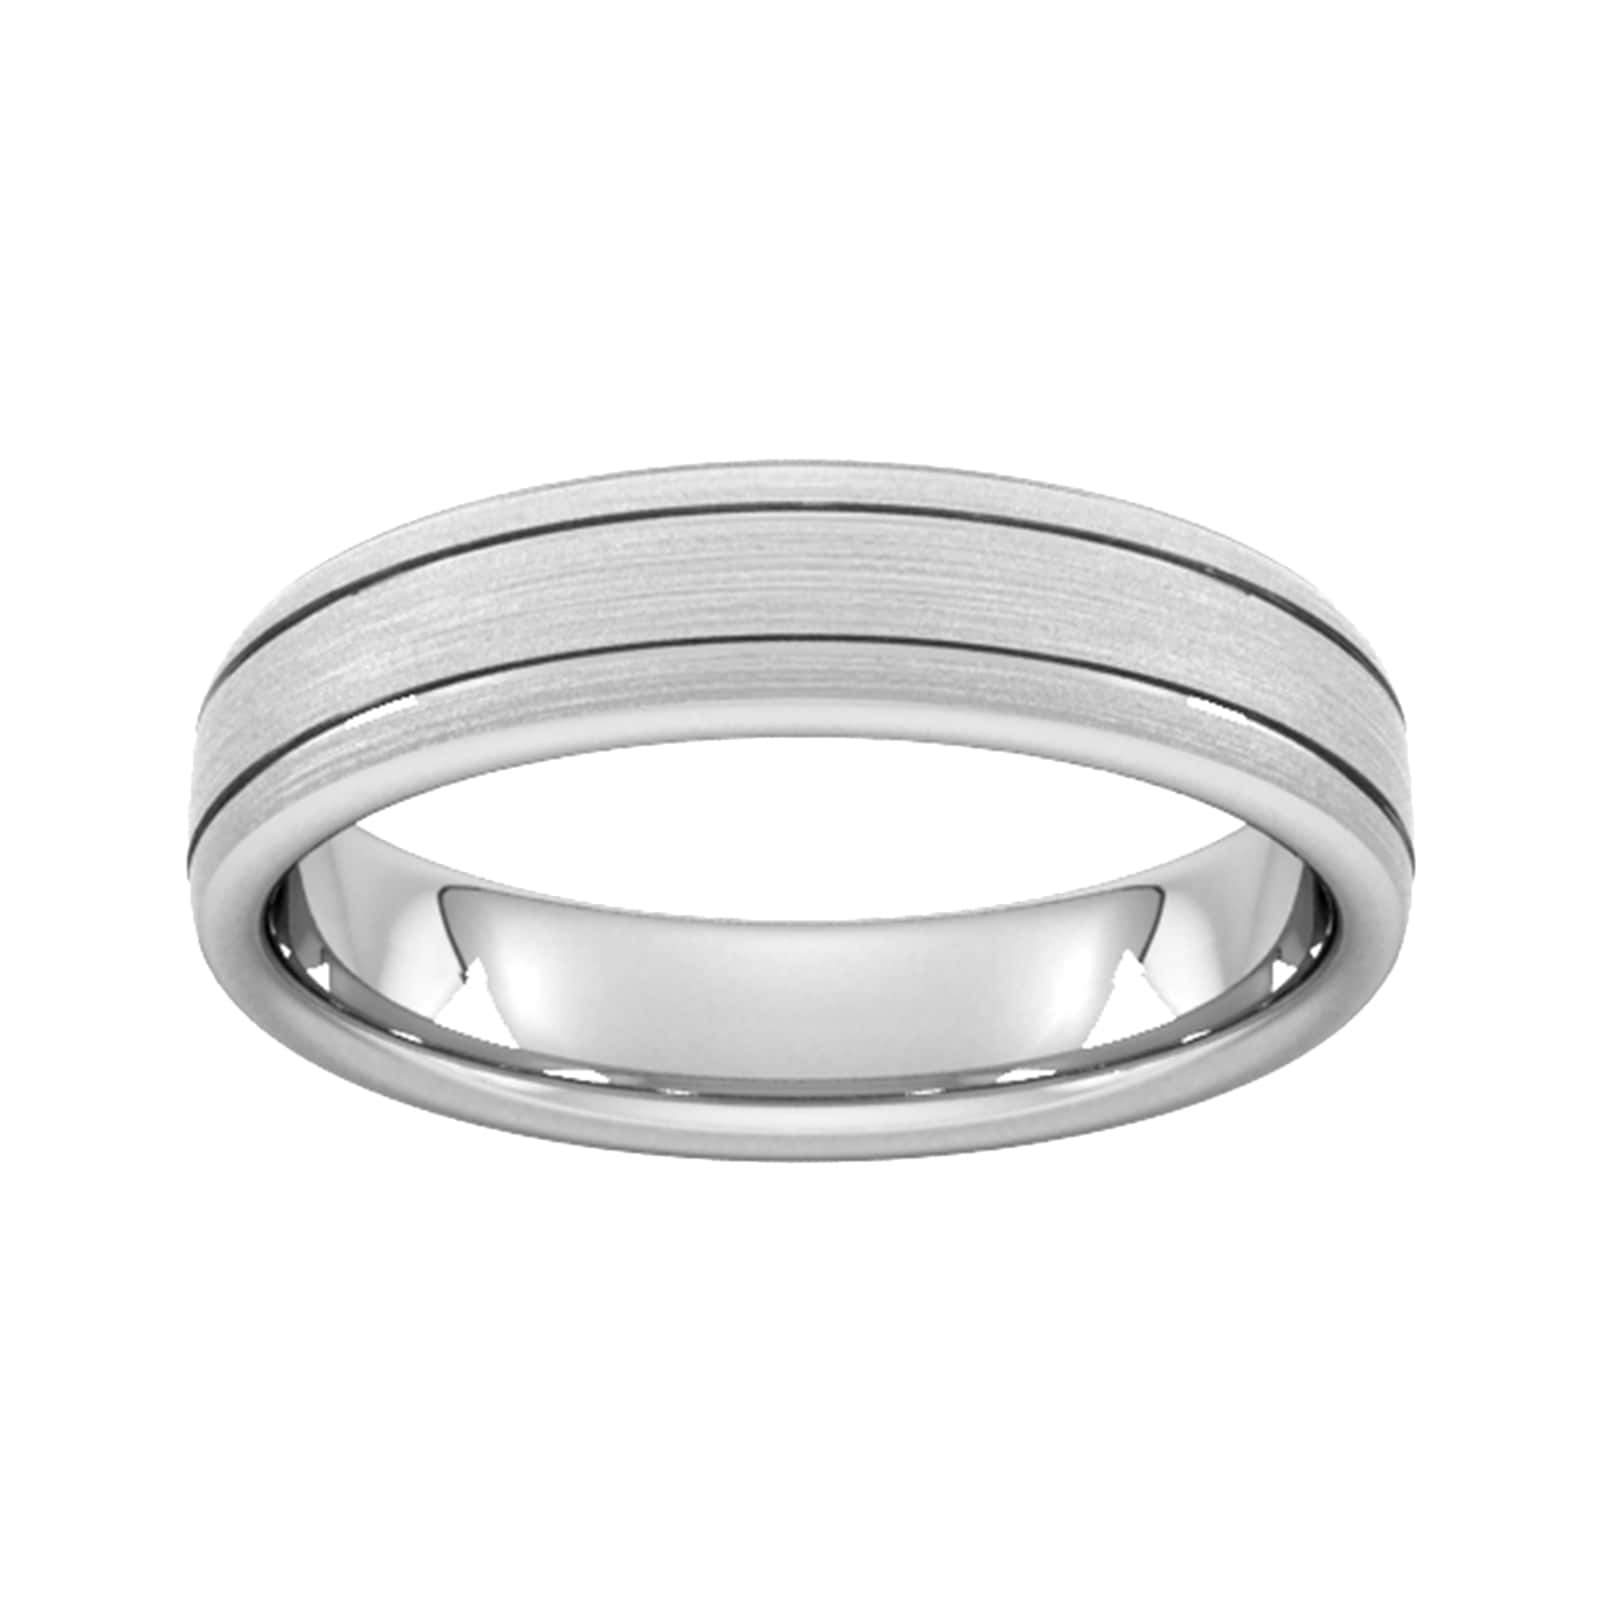 5mm D Shape Standard Matt Finish With Double Grooves Wedding Ring In 9 Carat White Gold - Ring Size N